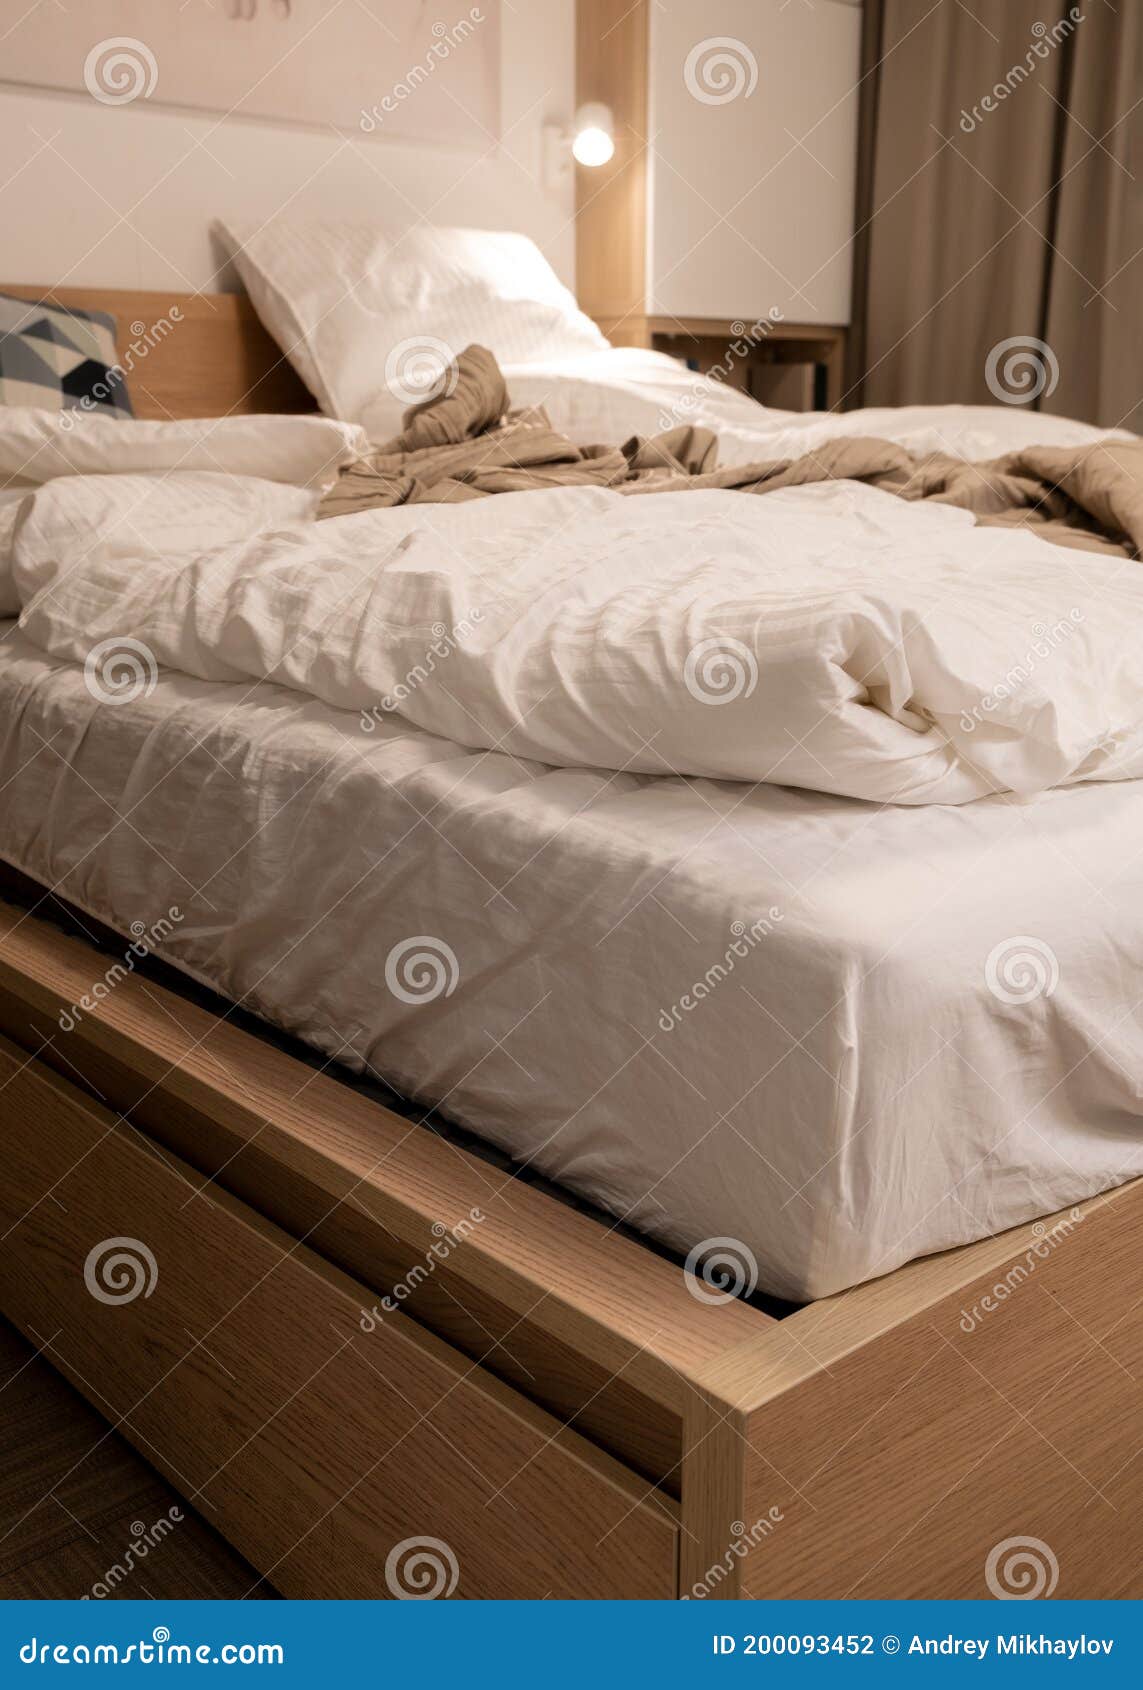 Modern Close-up of a Crumpled Hotel Bed after Sex, As on a Light Background picture pic